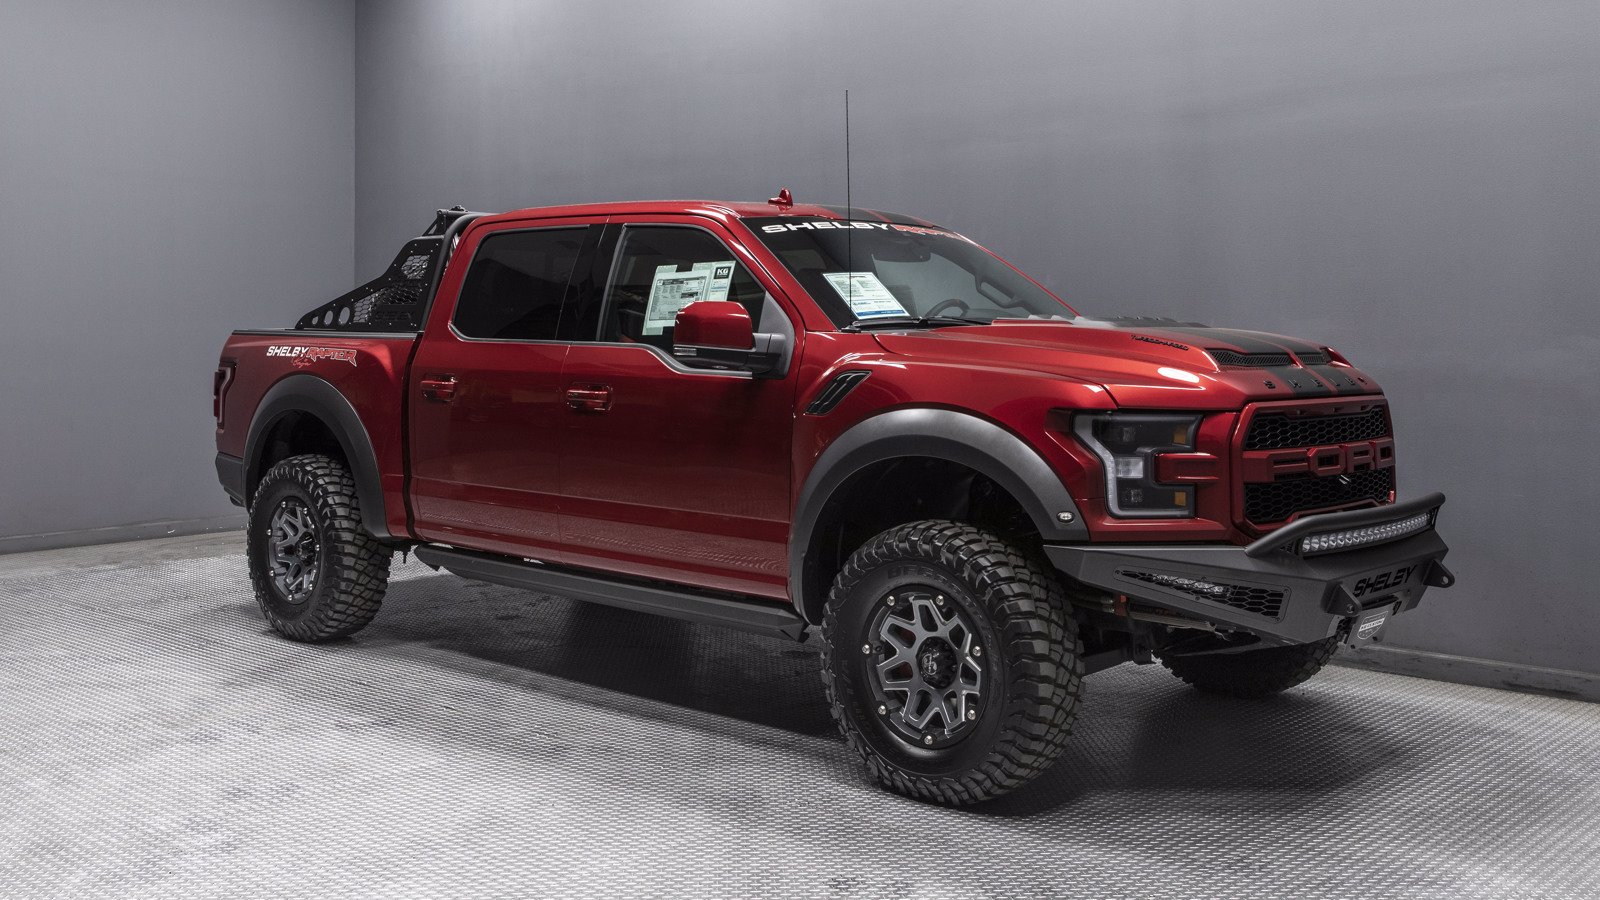 View Ford F 150 Raptor 2020 Price In India Images - Wallpaper Zoo